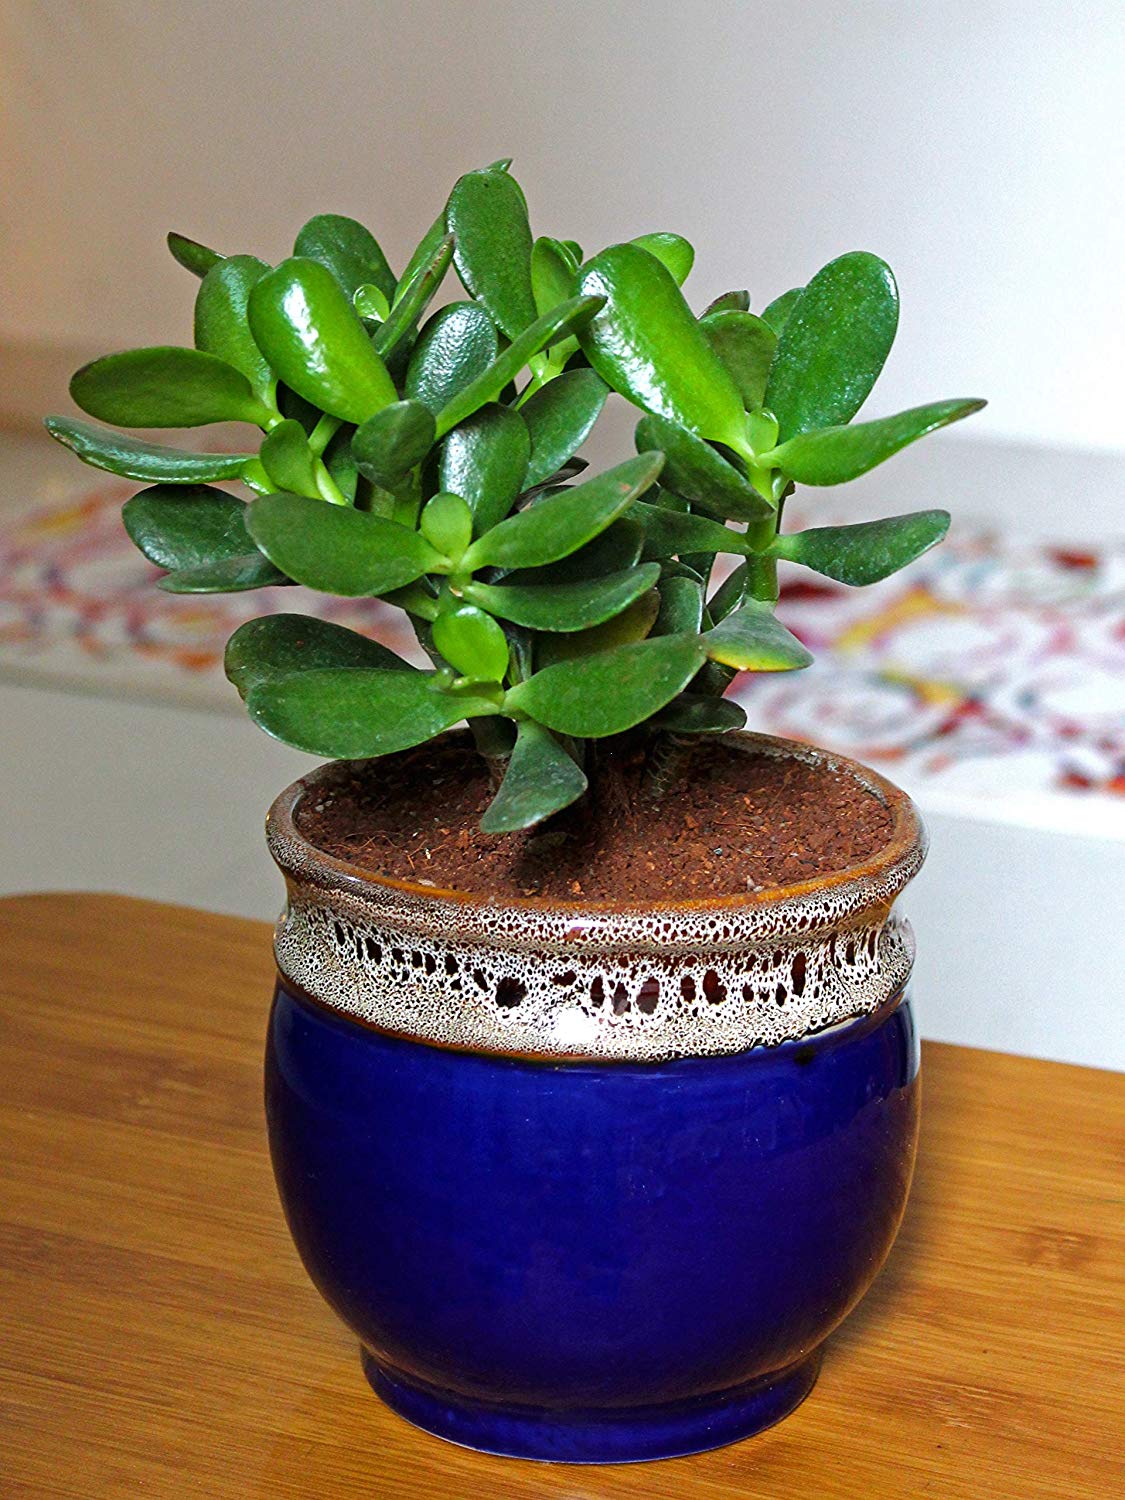 Air Purifying Good Luck Live Natural Plants in Exquisite Ceramic Pots. Best Indoor Plants online in India. Best green gifts for corporate or any occasions. Love plants as gifts. Crassula Jade quality houseplants shipped all over India.